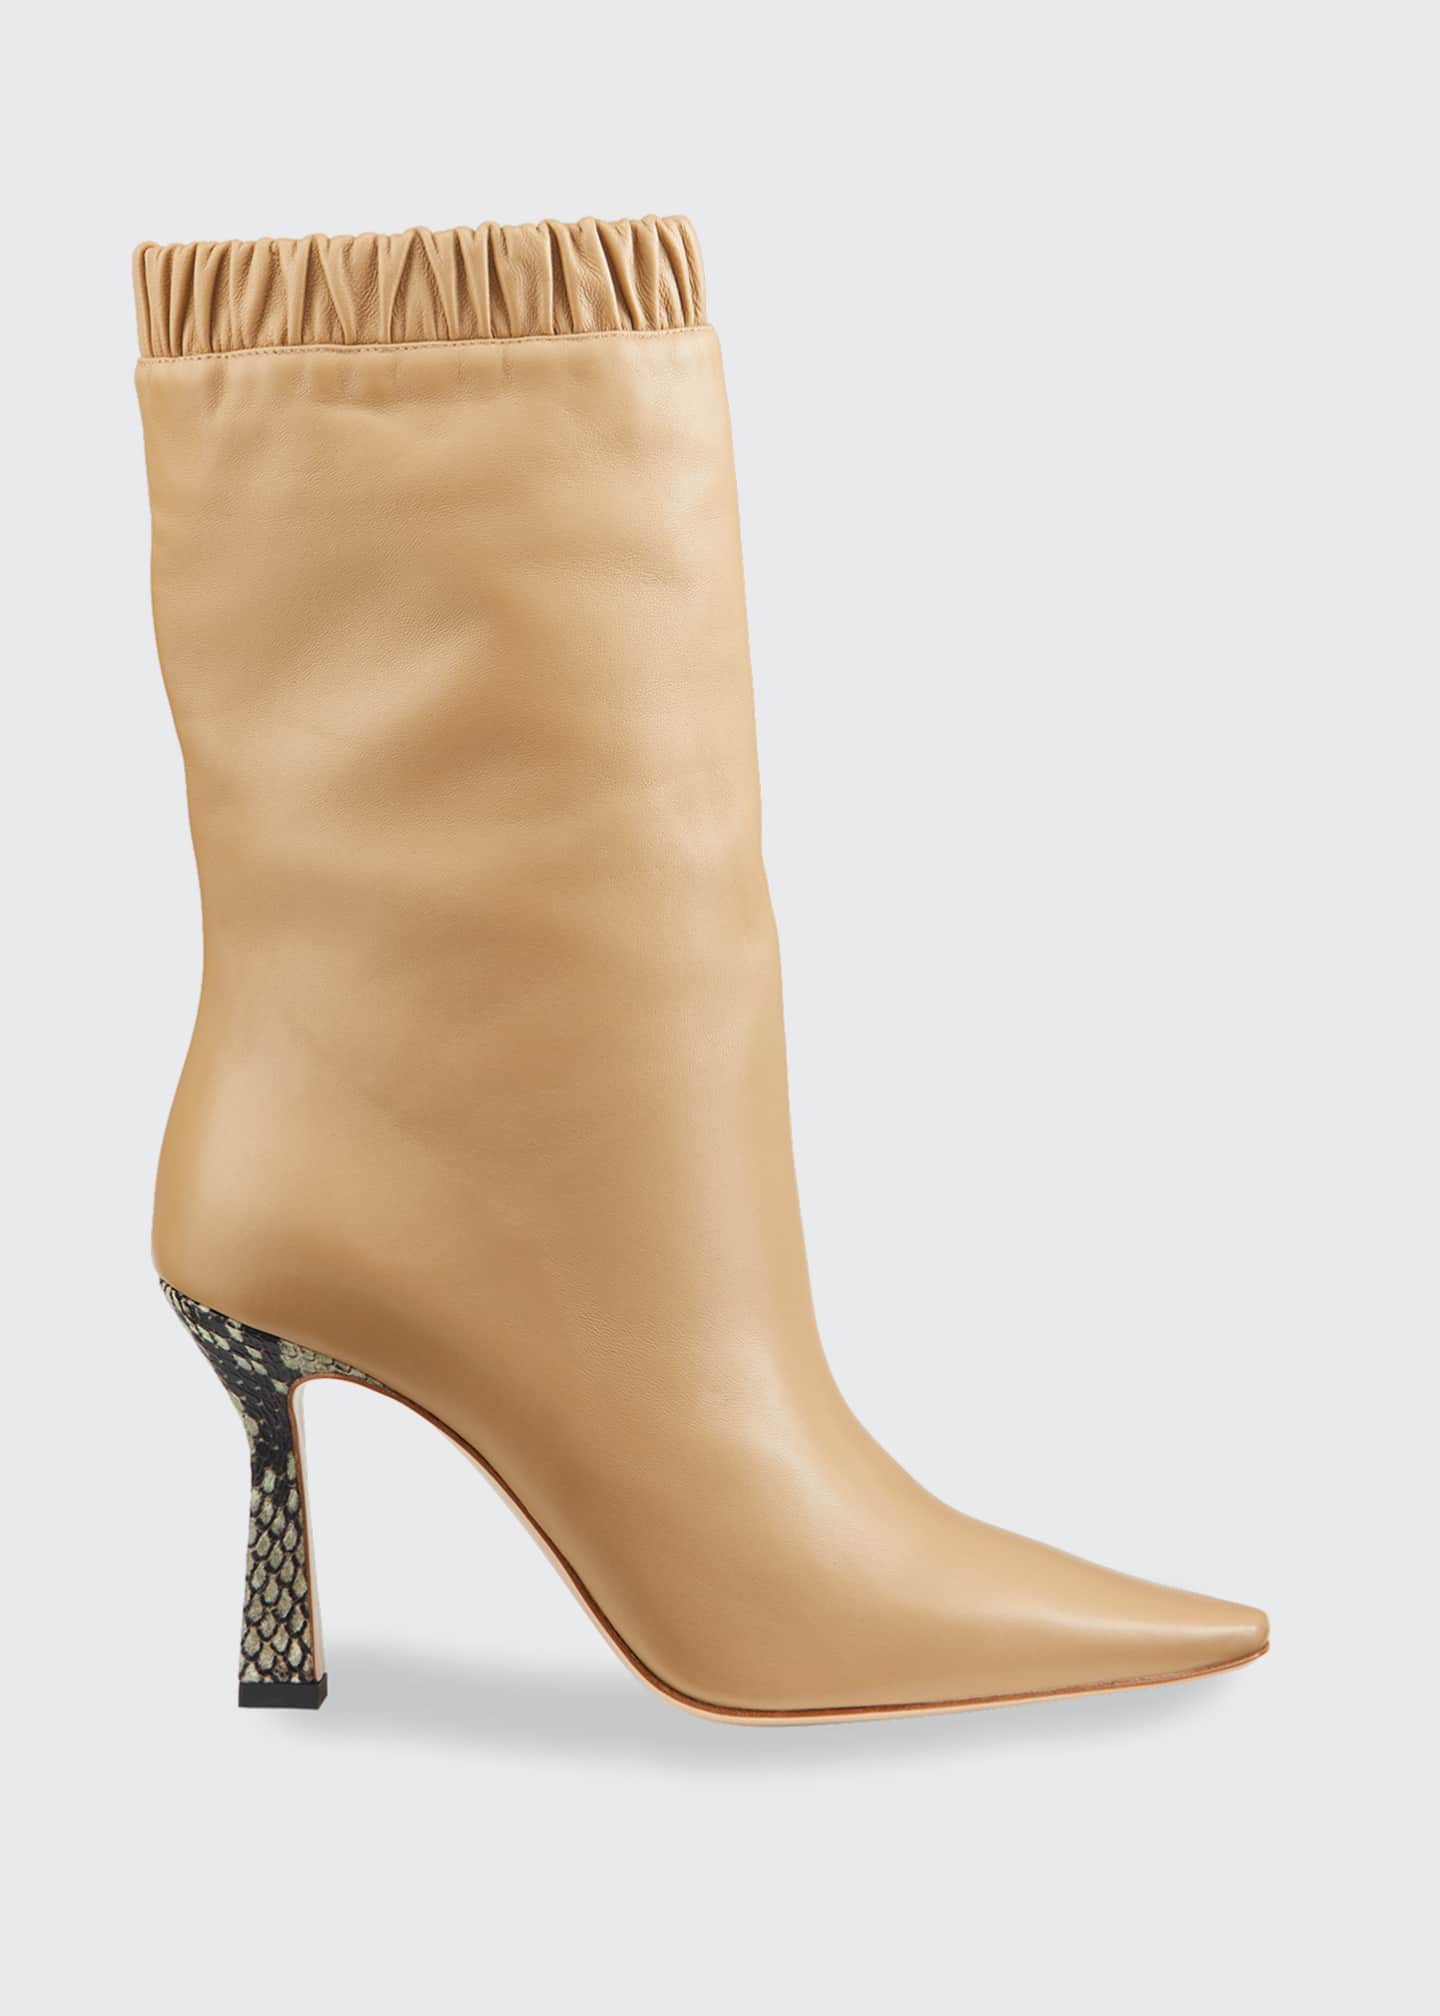 Wandler Lina Slouch Leather Mid-Calf Boots - Bergdorf Goodman